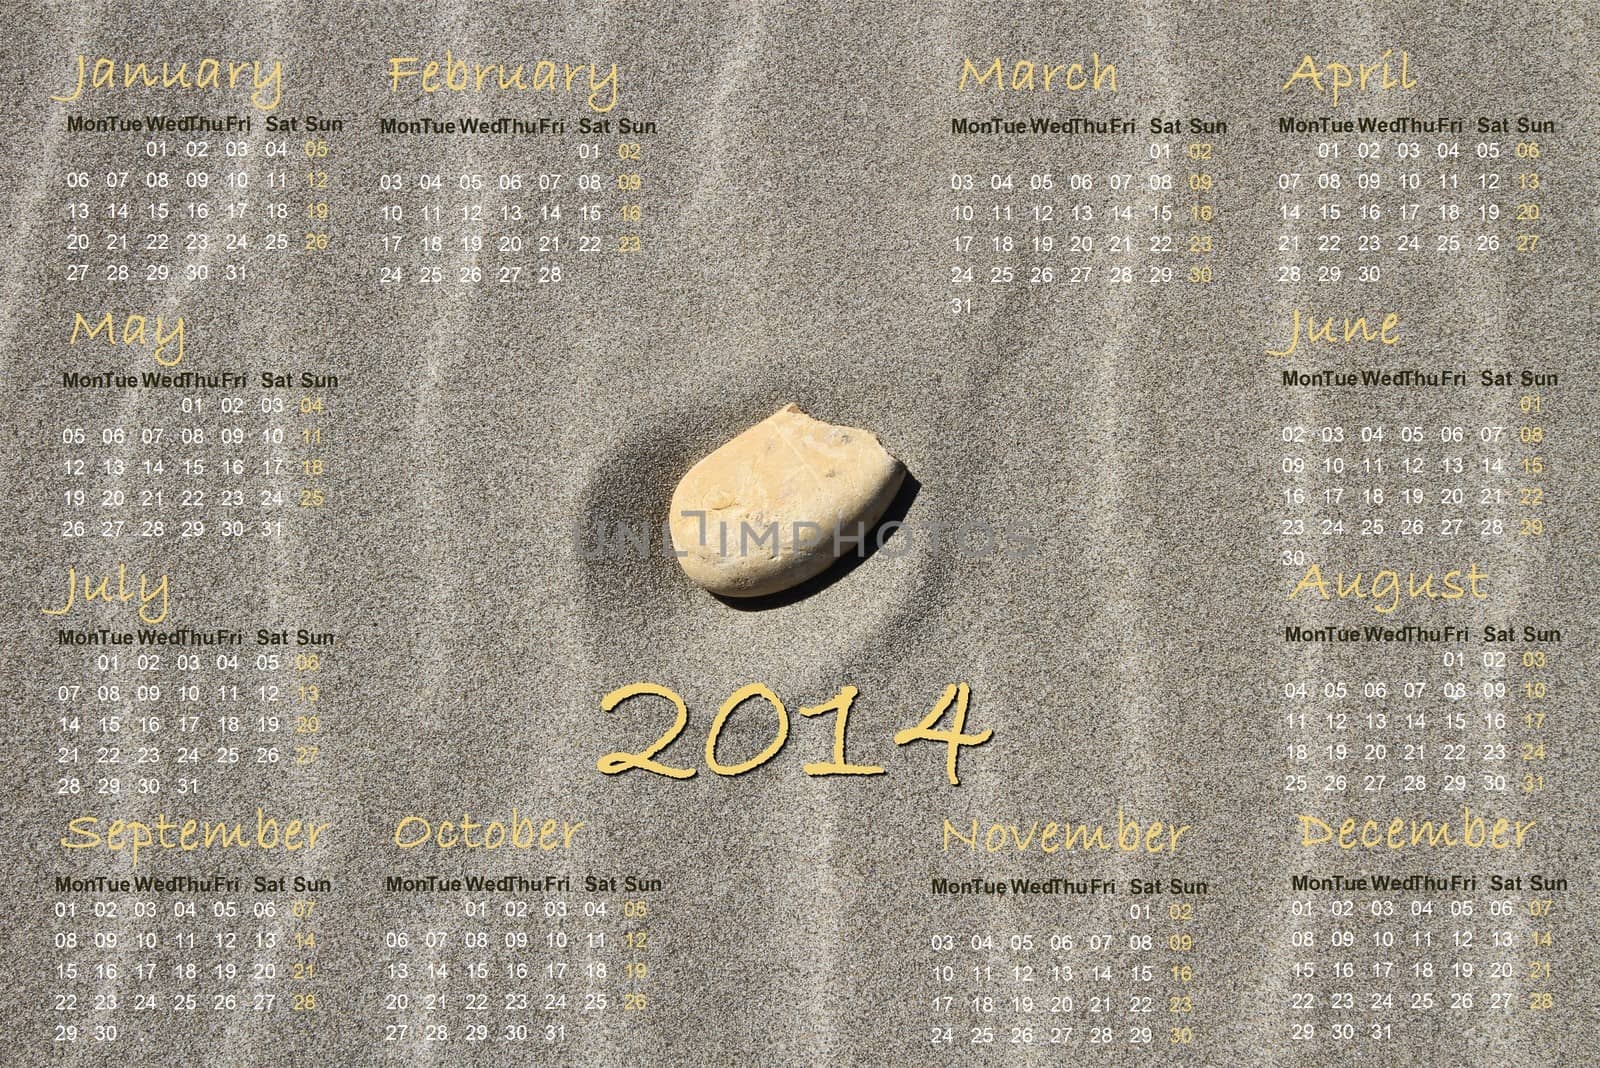 2014 english calendar with stone alone in the middle of beach sand waves